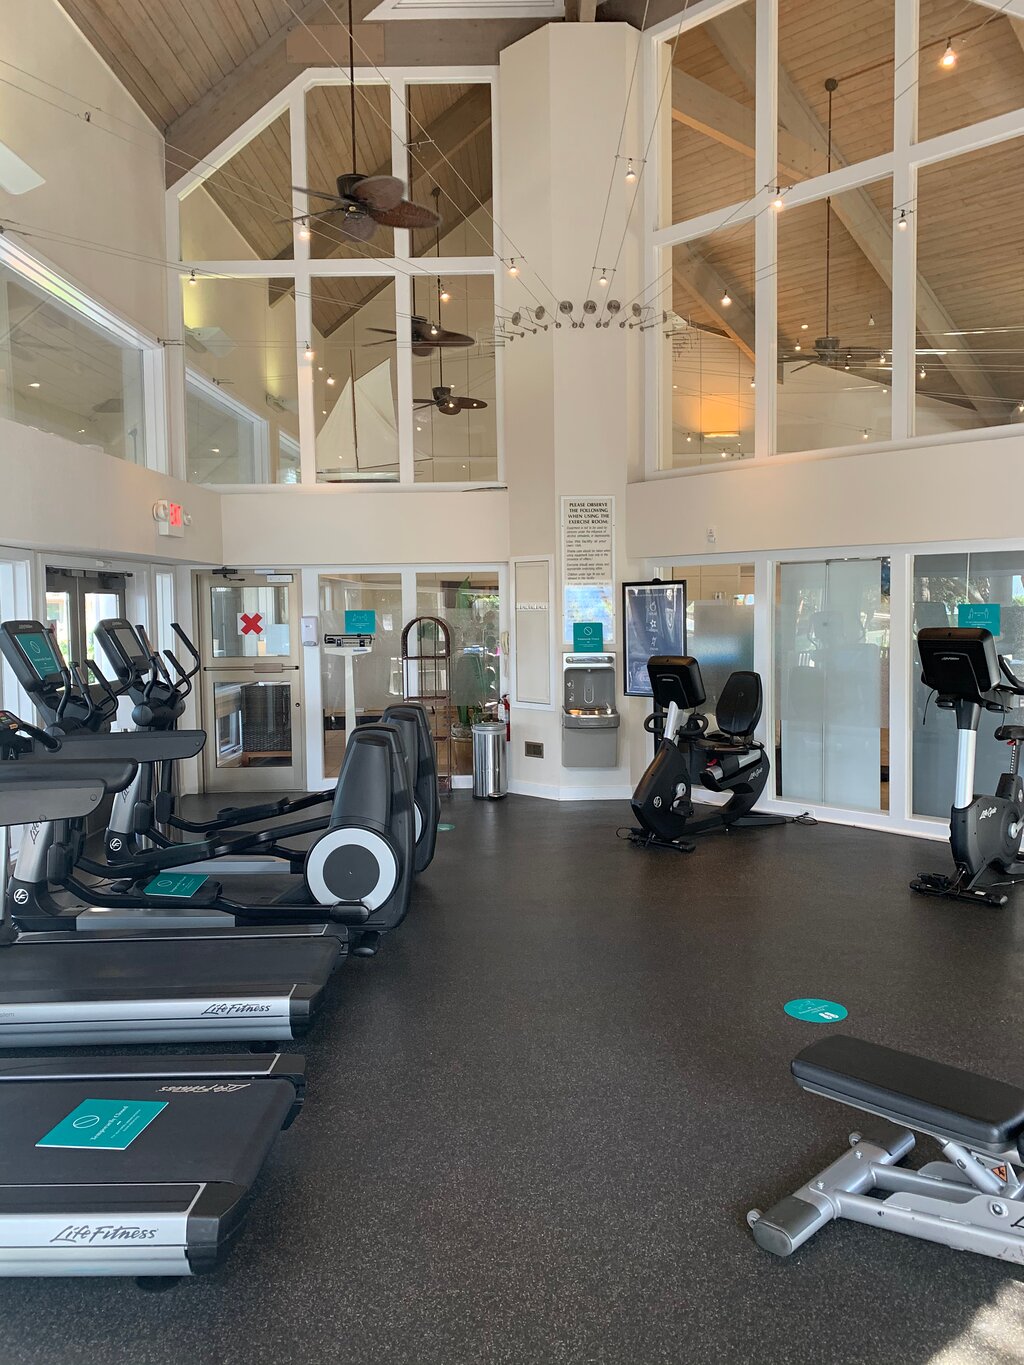 Marriott's Monarch at Sea Pines Fitness Center